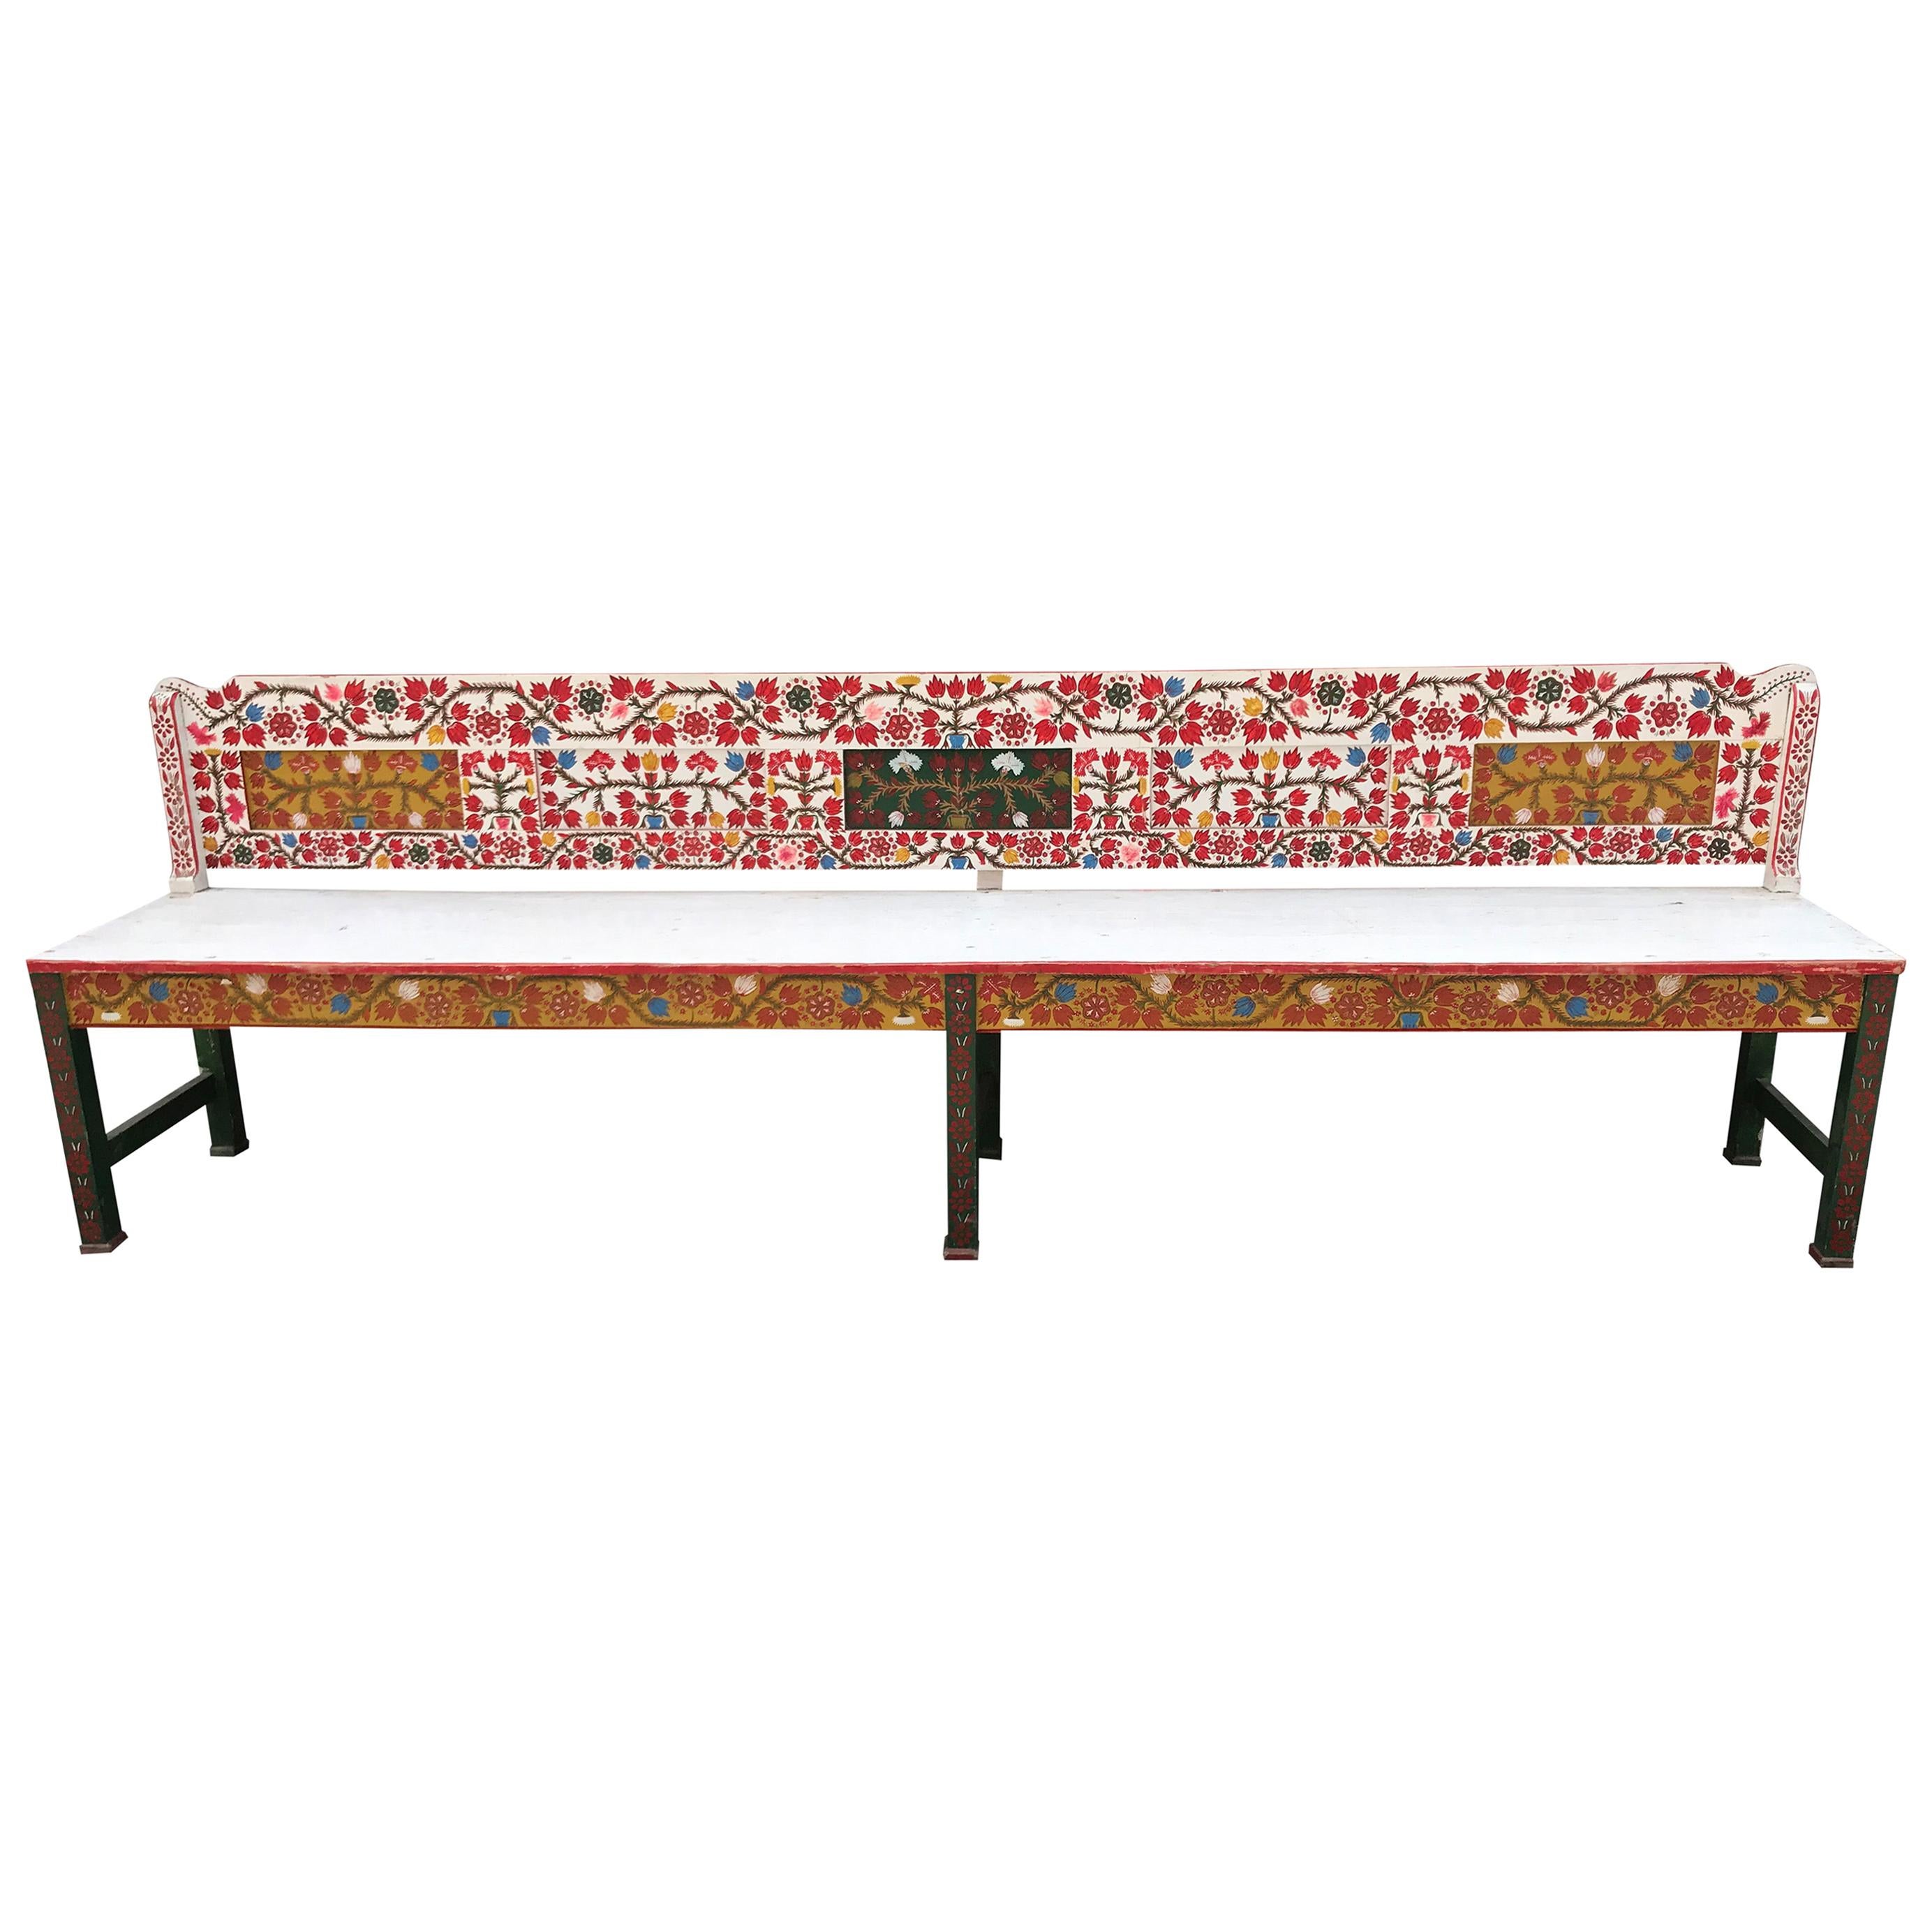 Antique Hand Painted Swedish Bench